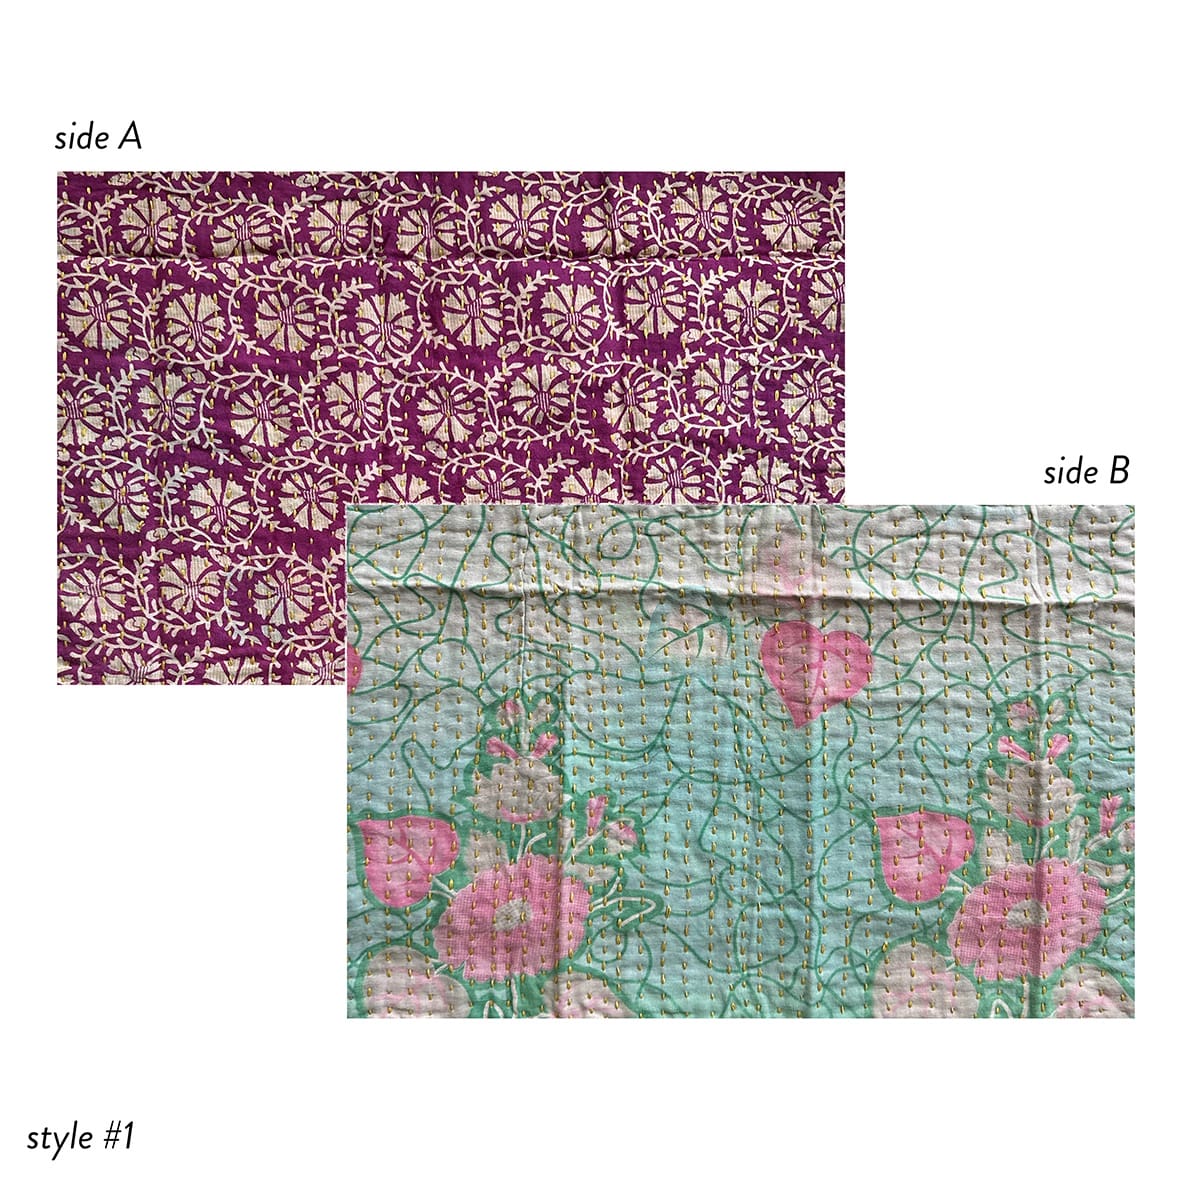 Load image into Gallery viewer, Placemat Set • Sari Home
